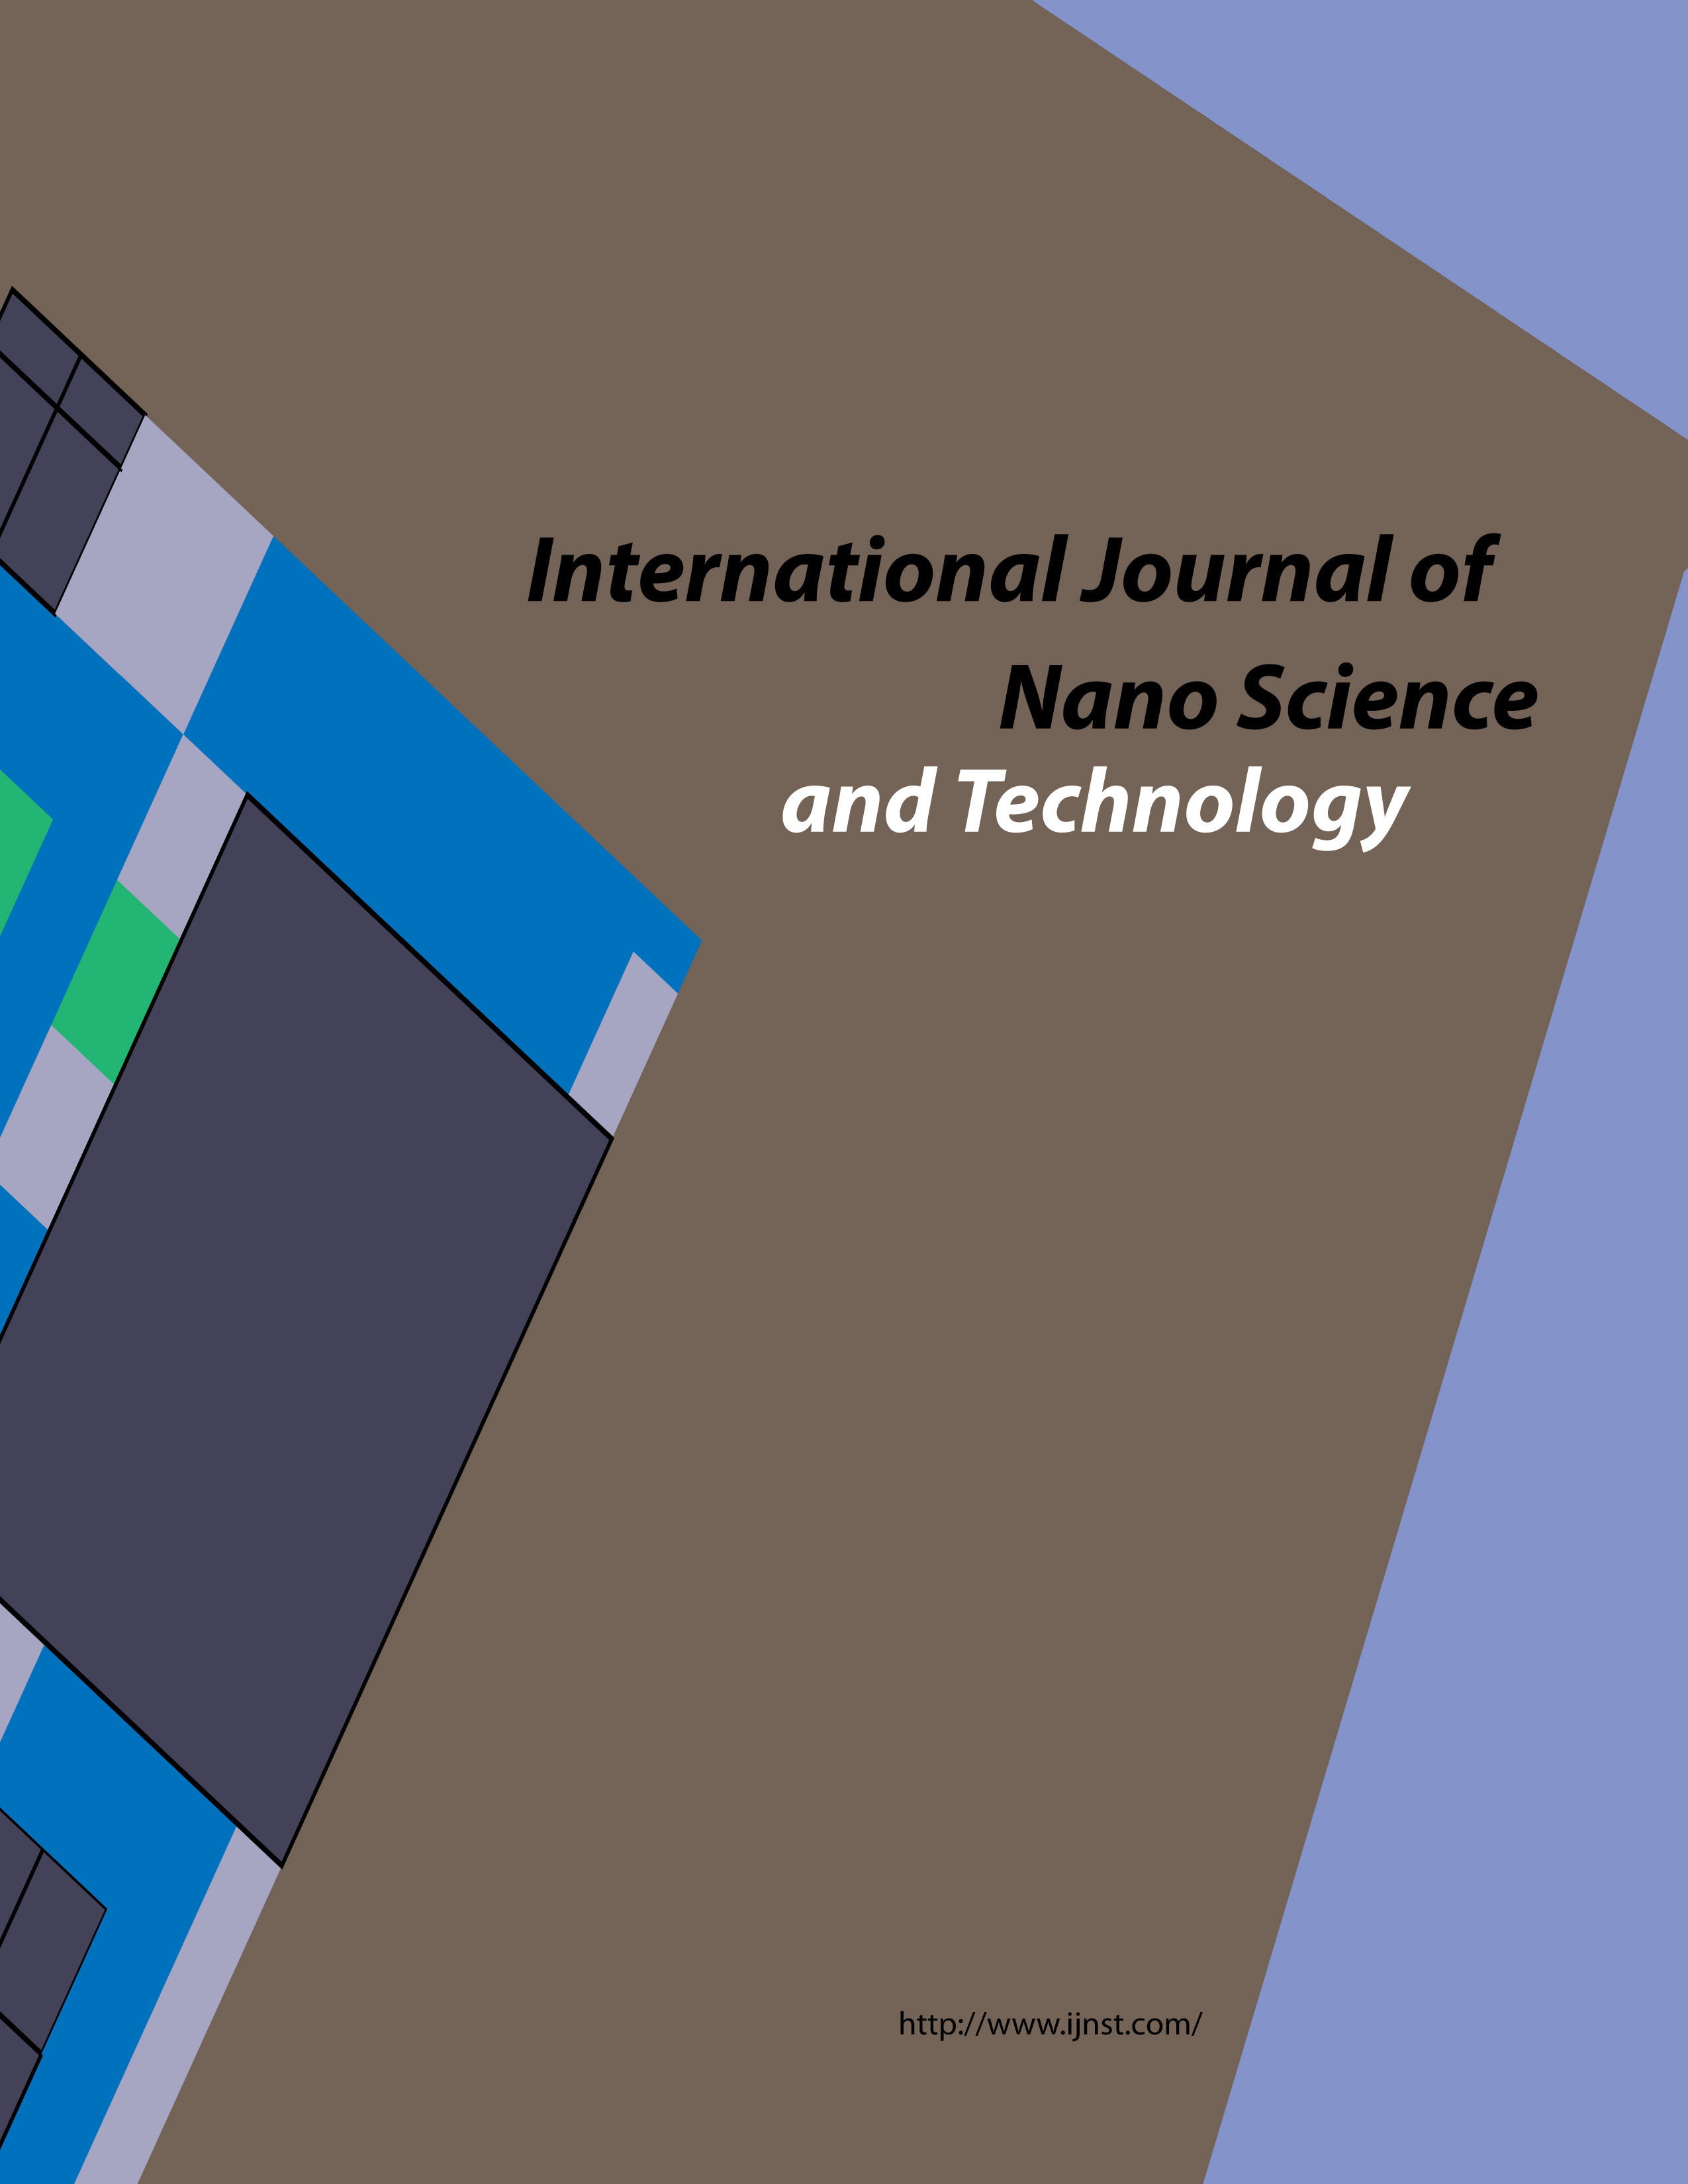 International Journal of Nano Science and Technology